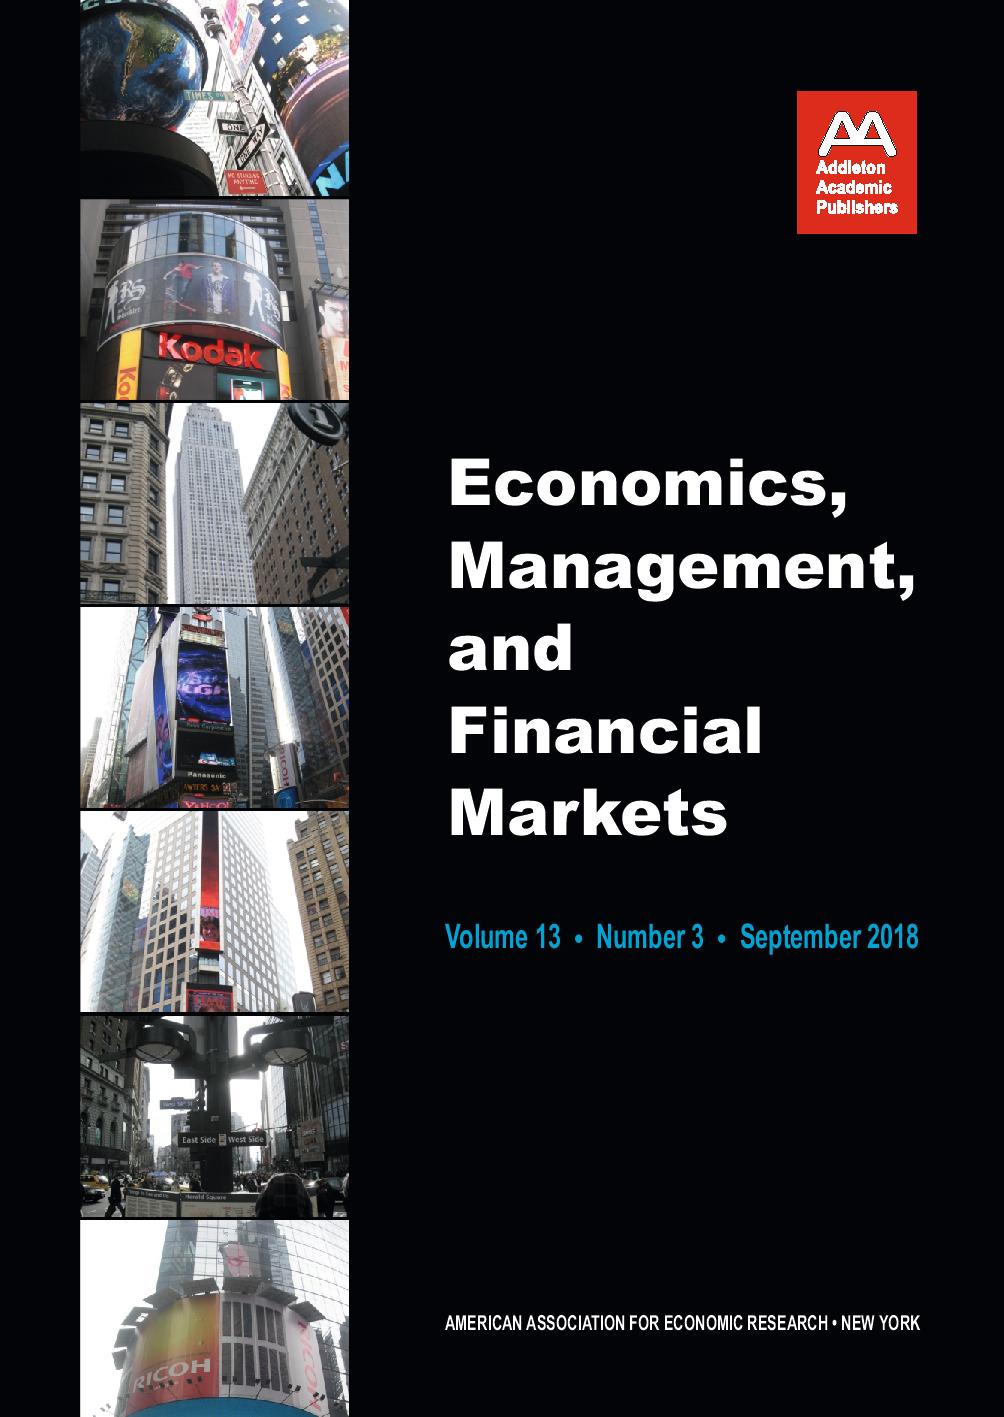 HUMAN RESOURCES MANAGEMENT ANALYSIS OF THE RATB Cover Image